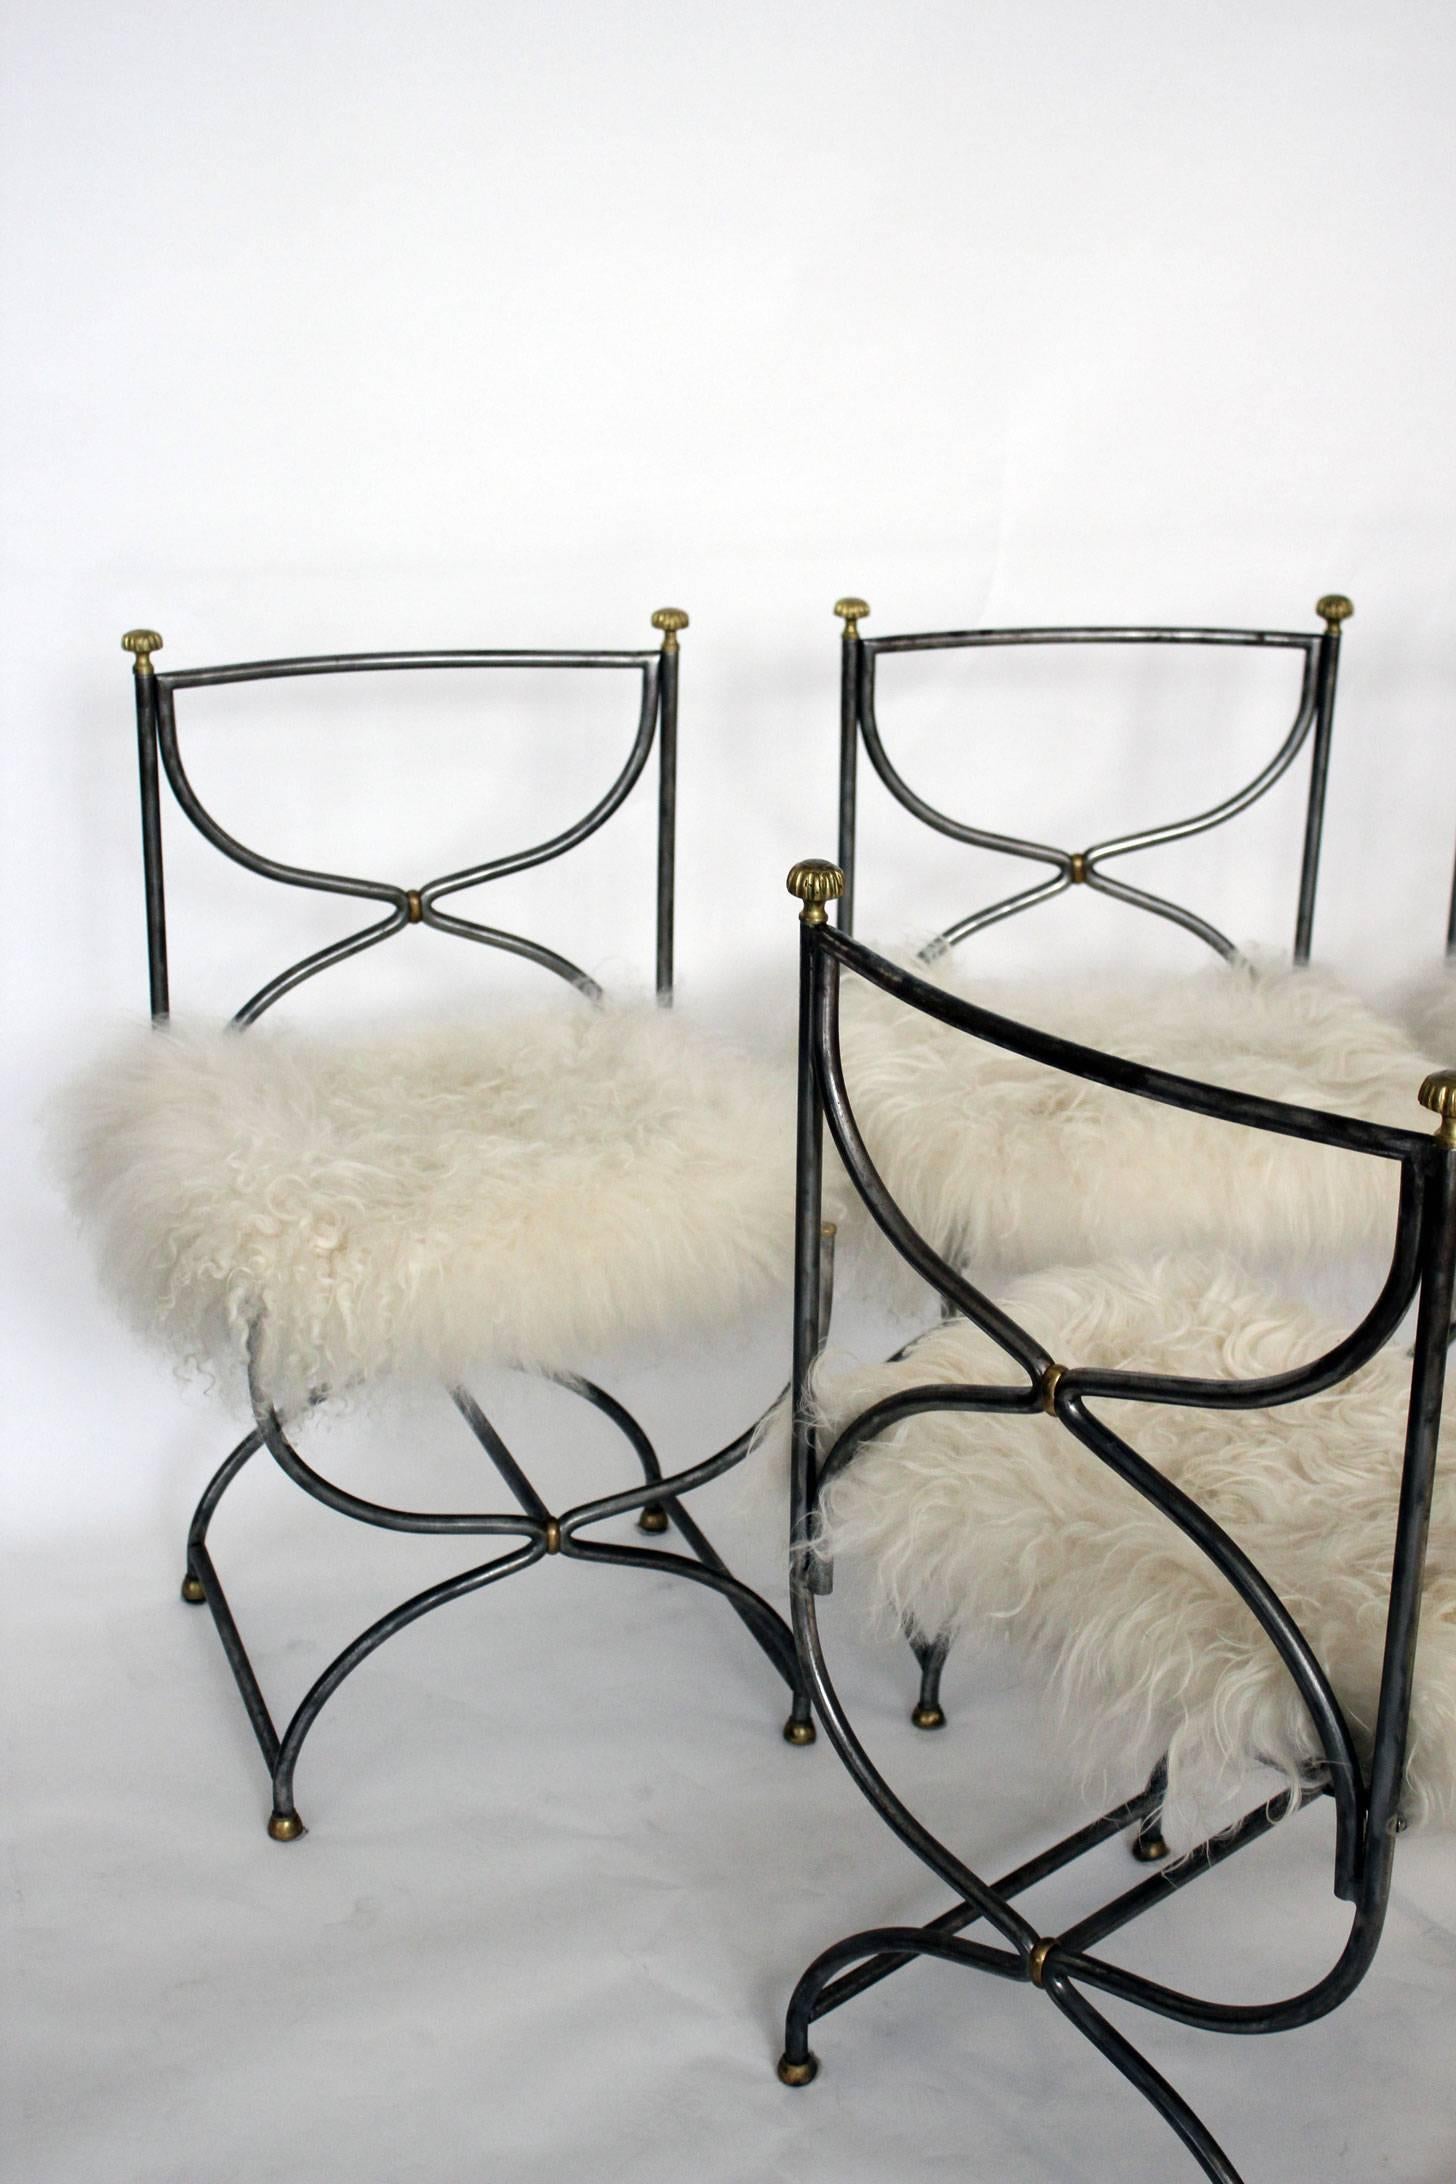 A set of four chairs designed in the style of Maison Jansen and manufactured in stainless steel and solid bronze. The chairs are in original condition and feature a fur cushion, circa 1960s.